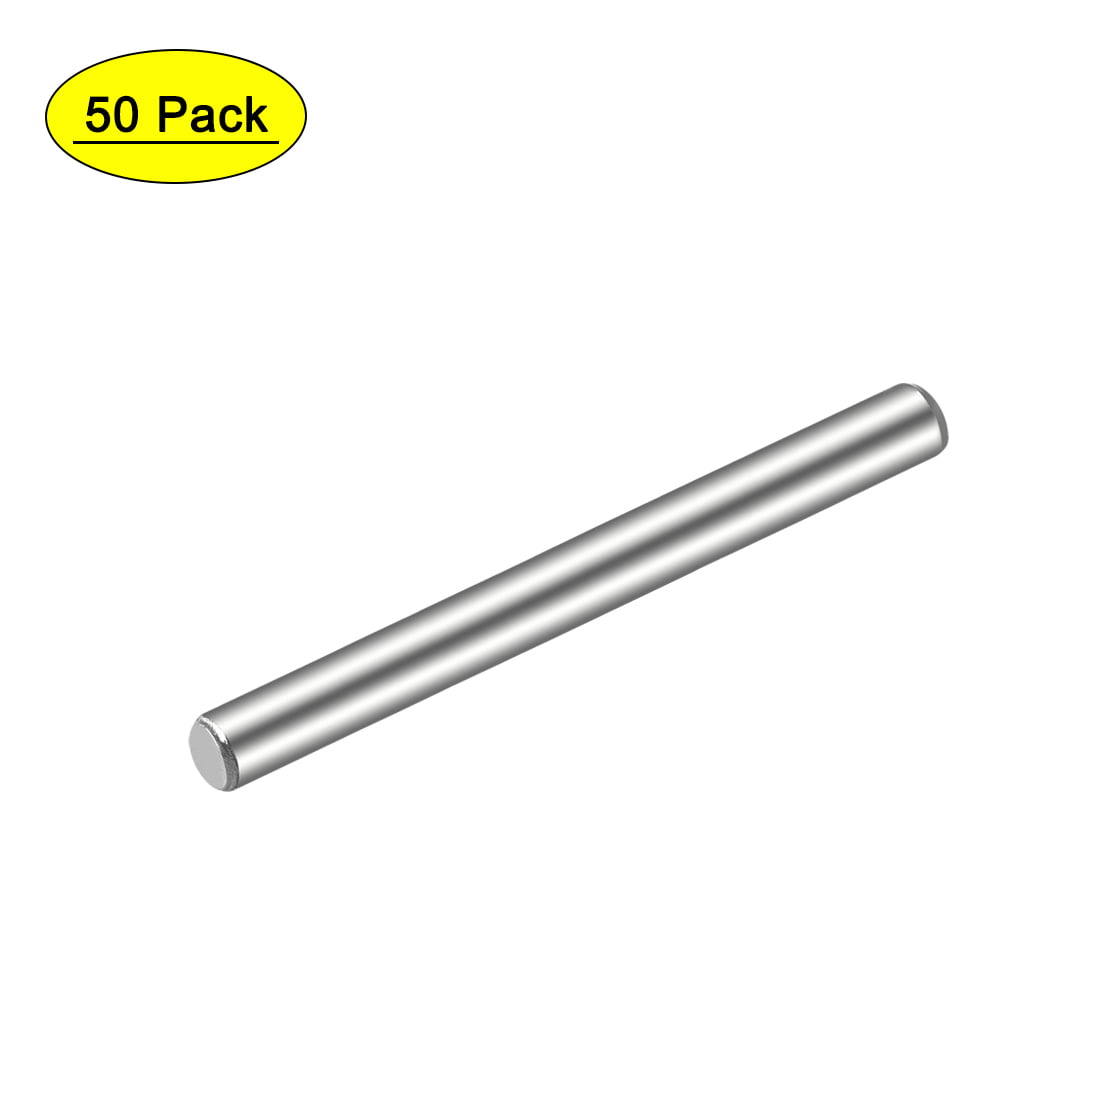 20 Pieces 18-8 Stainless Steel Dowel Pins 3/16" Dia x 2.00" Length 